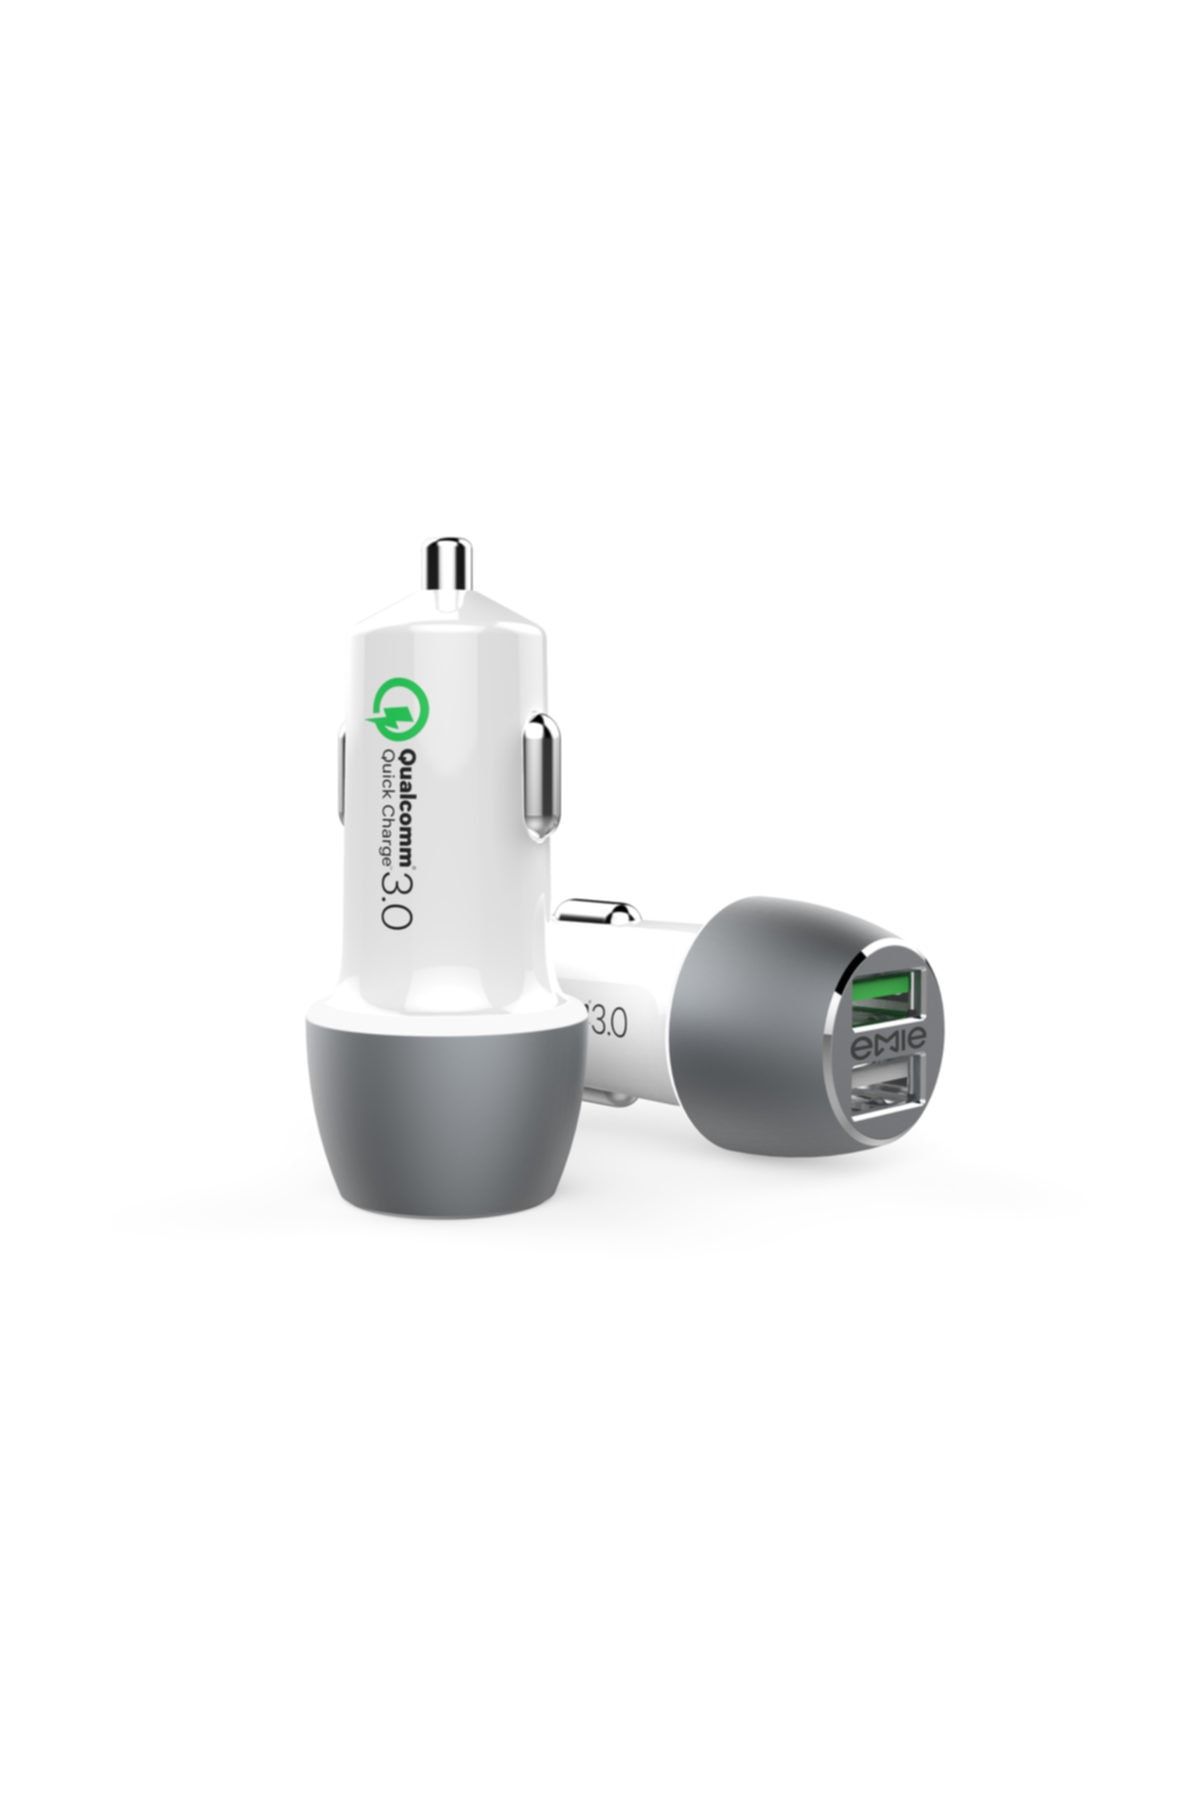 Emie Buga Car Charger 2 Port Car Charger - 30w - Qualcomm 3.0